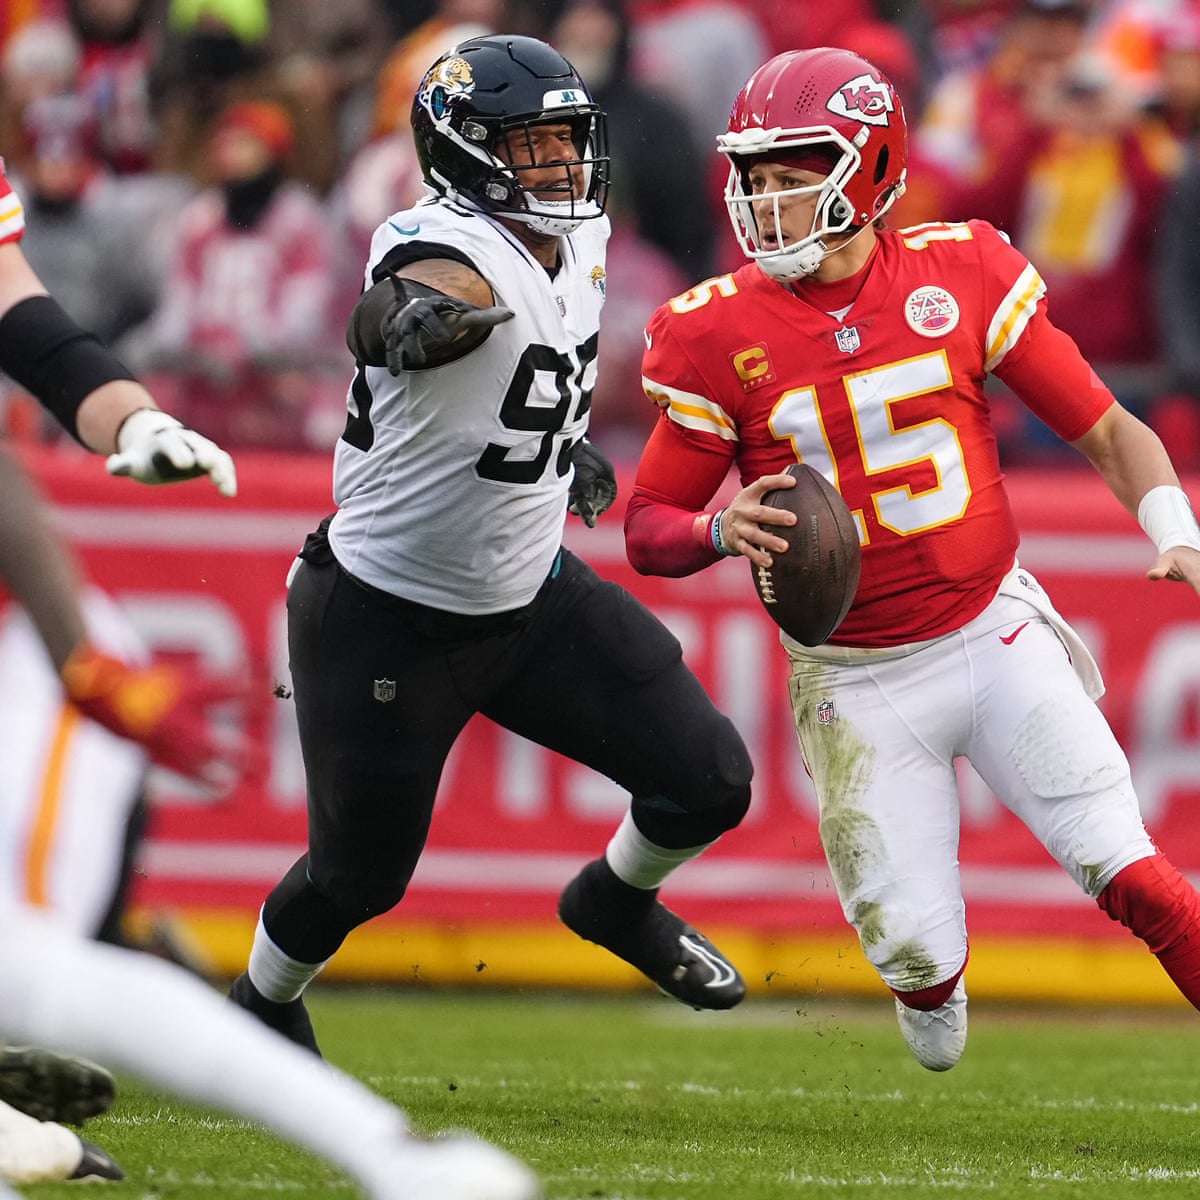 Patrick Mahomes beats injury to lead Chiefs past Jaguars and into